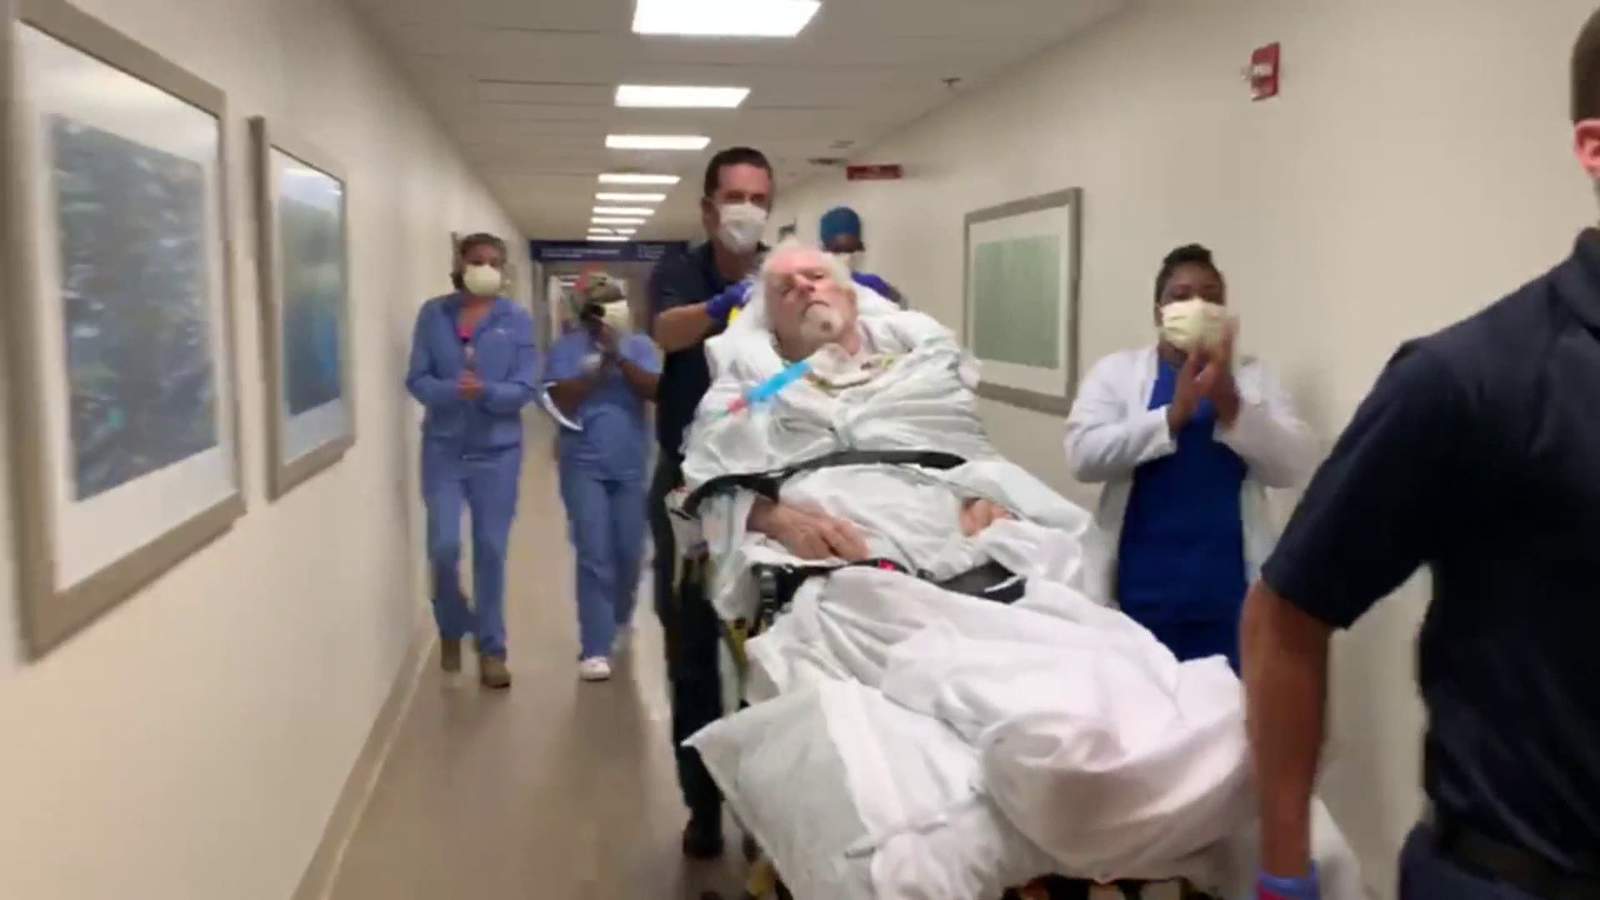 Man placed in coma after contracting coronavirus finally released from hospital